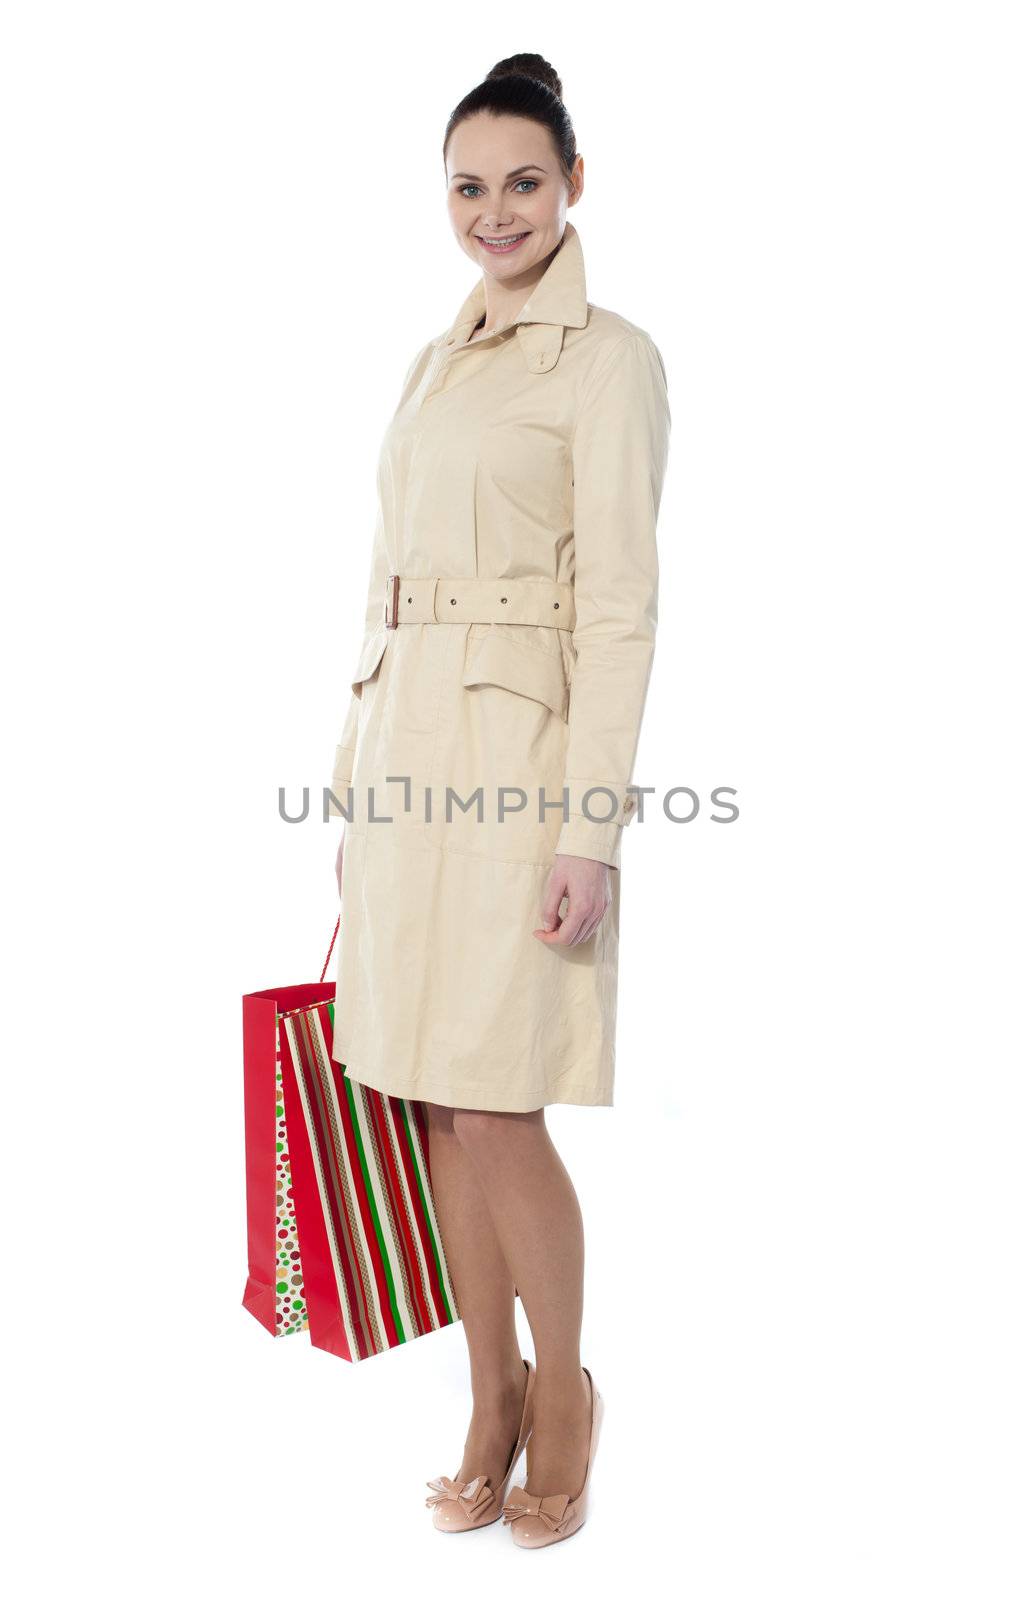 Lovely woman with shopping bags over white